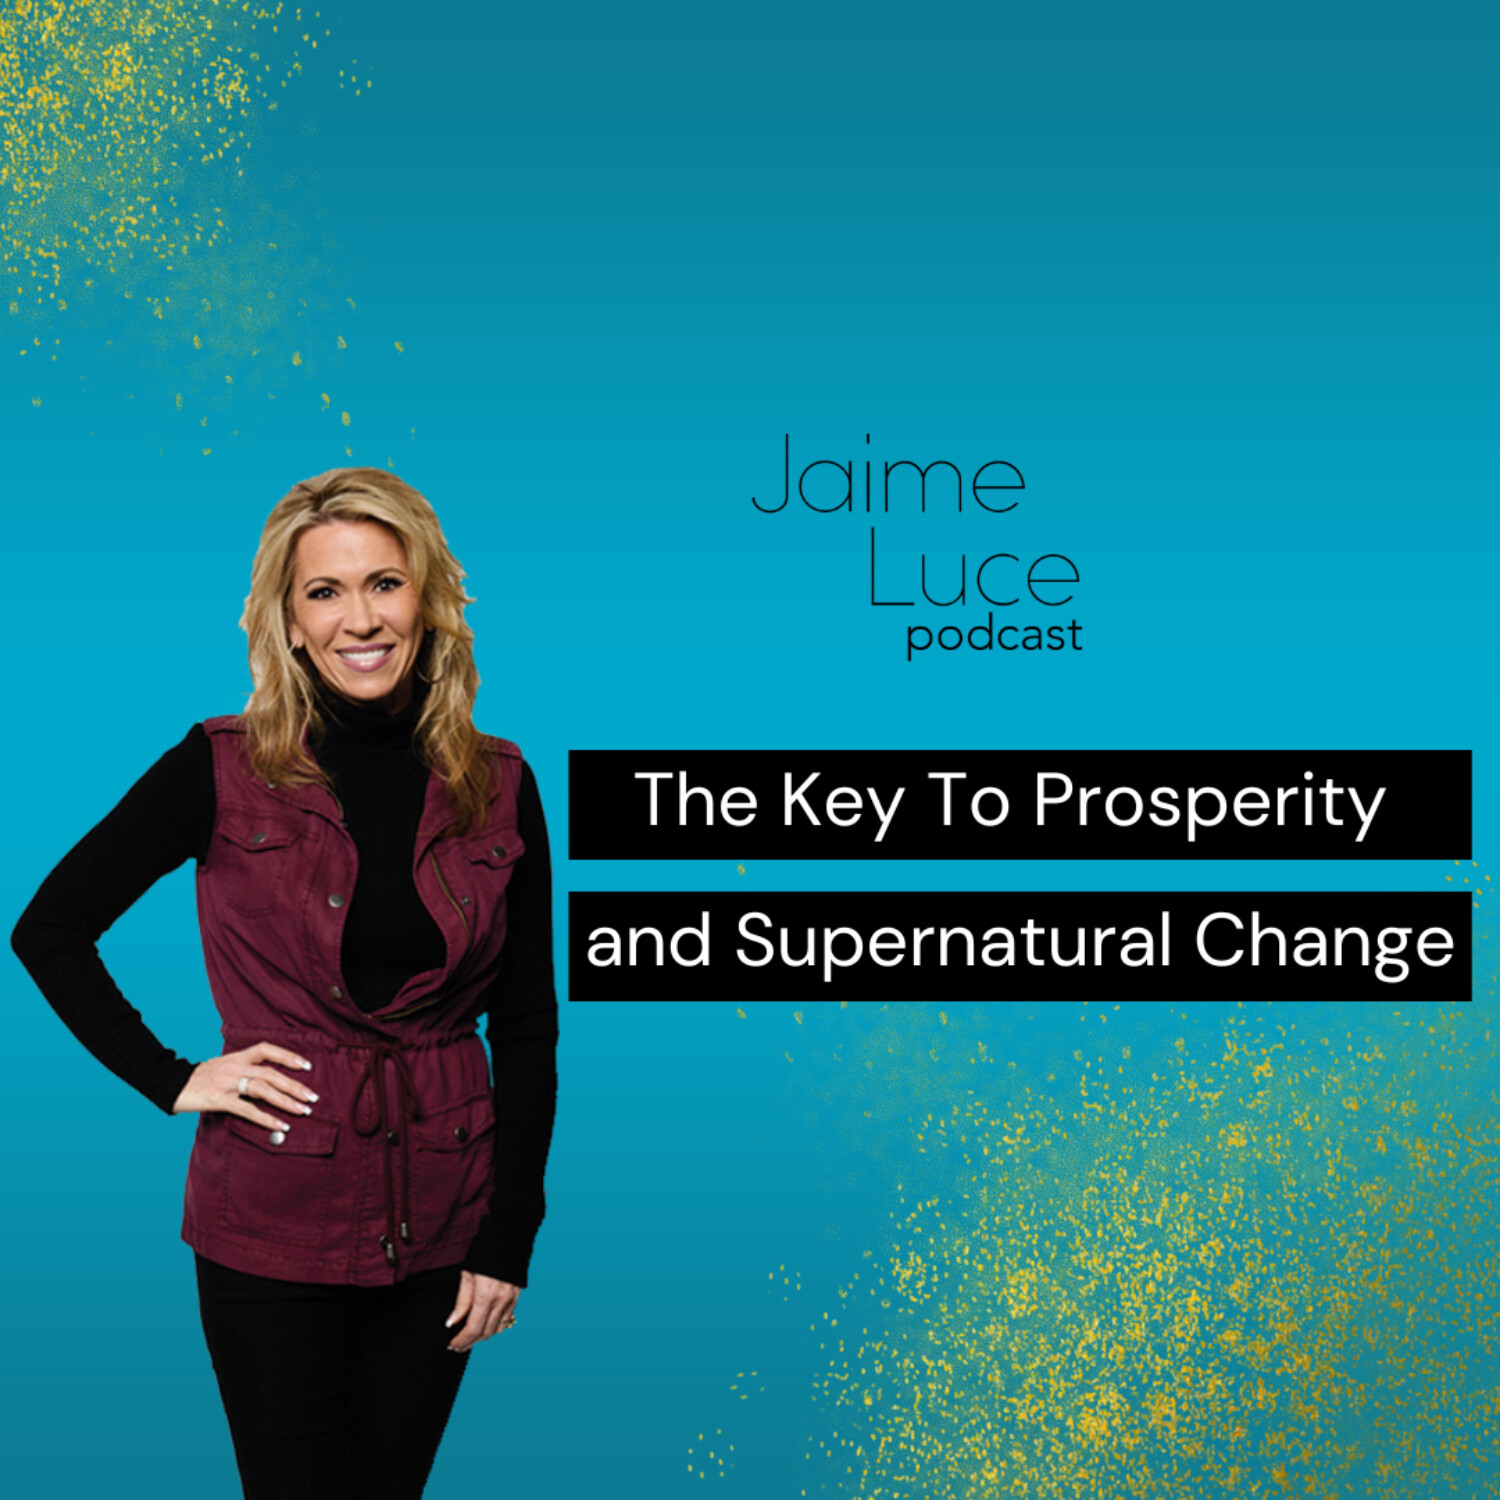 The Key To Prosperity and Supernatural Change